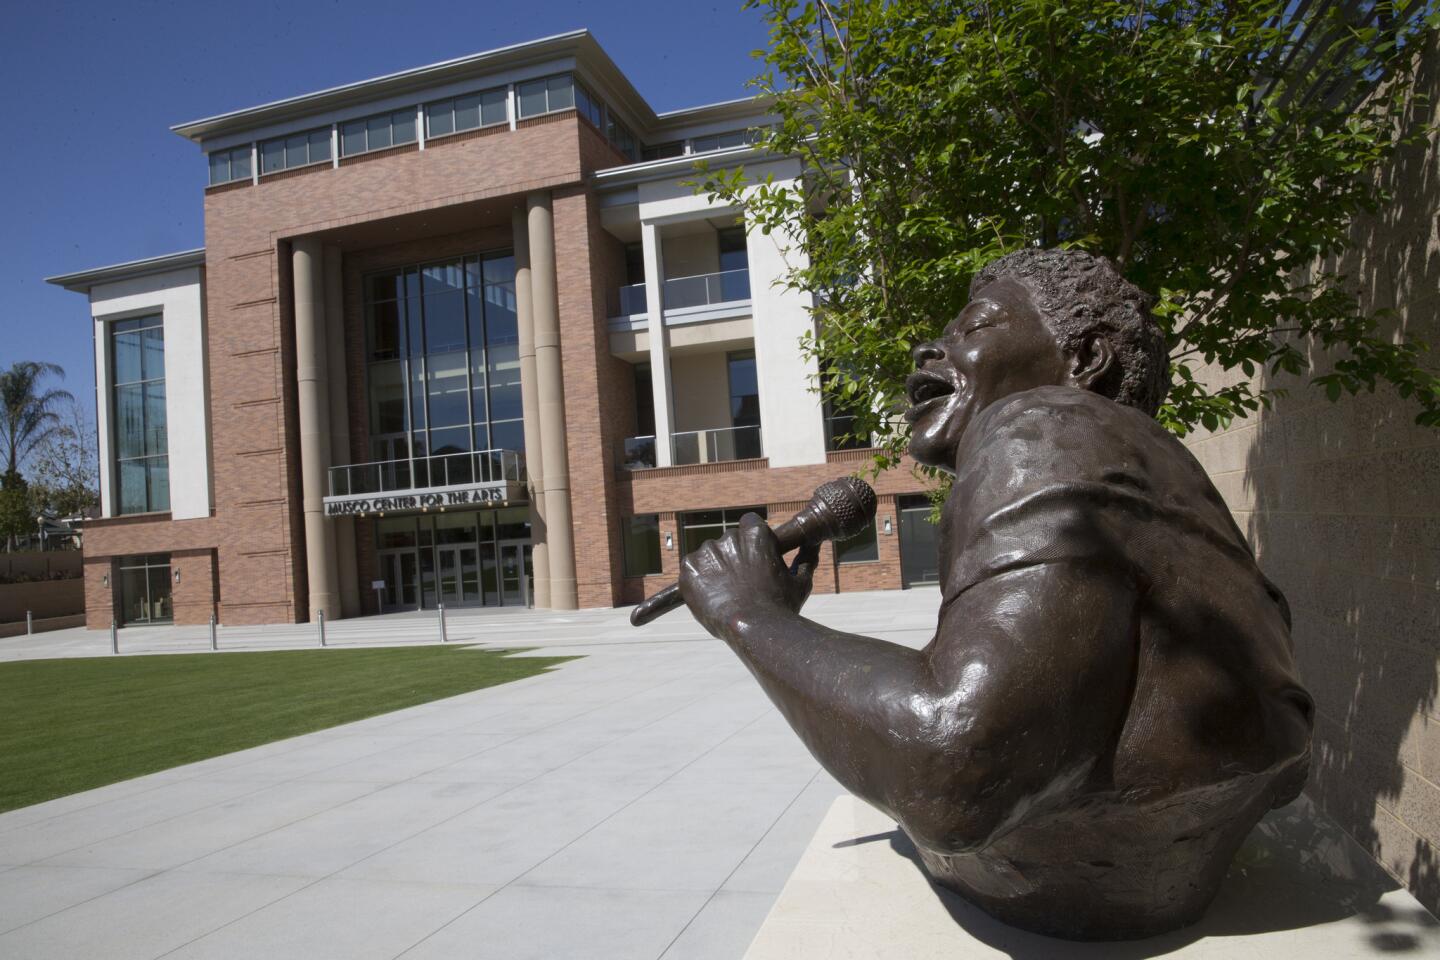 The Marybelle and Sebastian P. Musco Center for the Arts at Chapman University will serve primarily as a performing venue for the school's students, though it also will host visiting performers and ensembles. A bust of Ella Fitzgerald stands in the courtyard. A bust of Ella Fitzgerald sits outside the front of the Musco Center for the Arts at Chapman University in Orange, Calif.